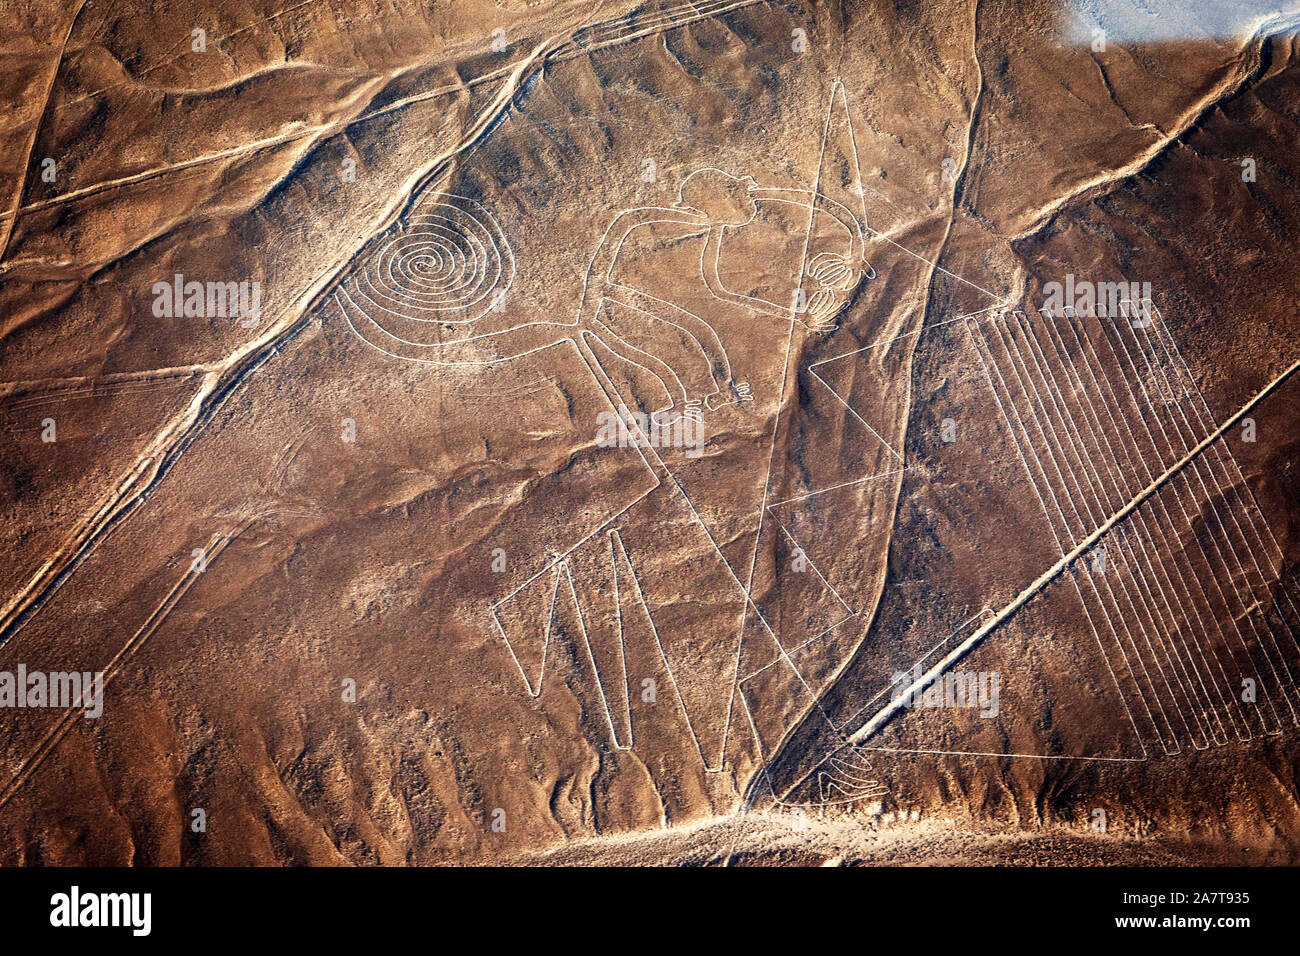 Flight over Nazca Desert.The Nazca Lines are a group of very large geoglyphs formed by depressions or shallow incisions made in the soil of desert. Stock Photo